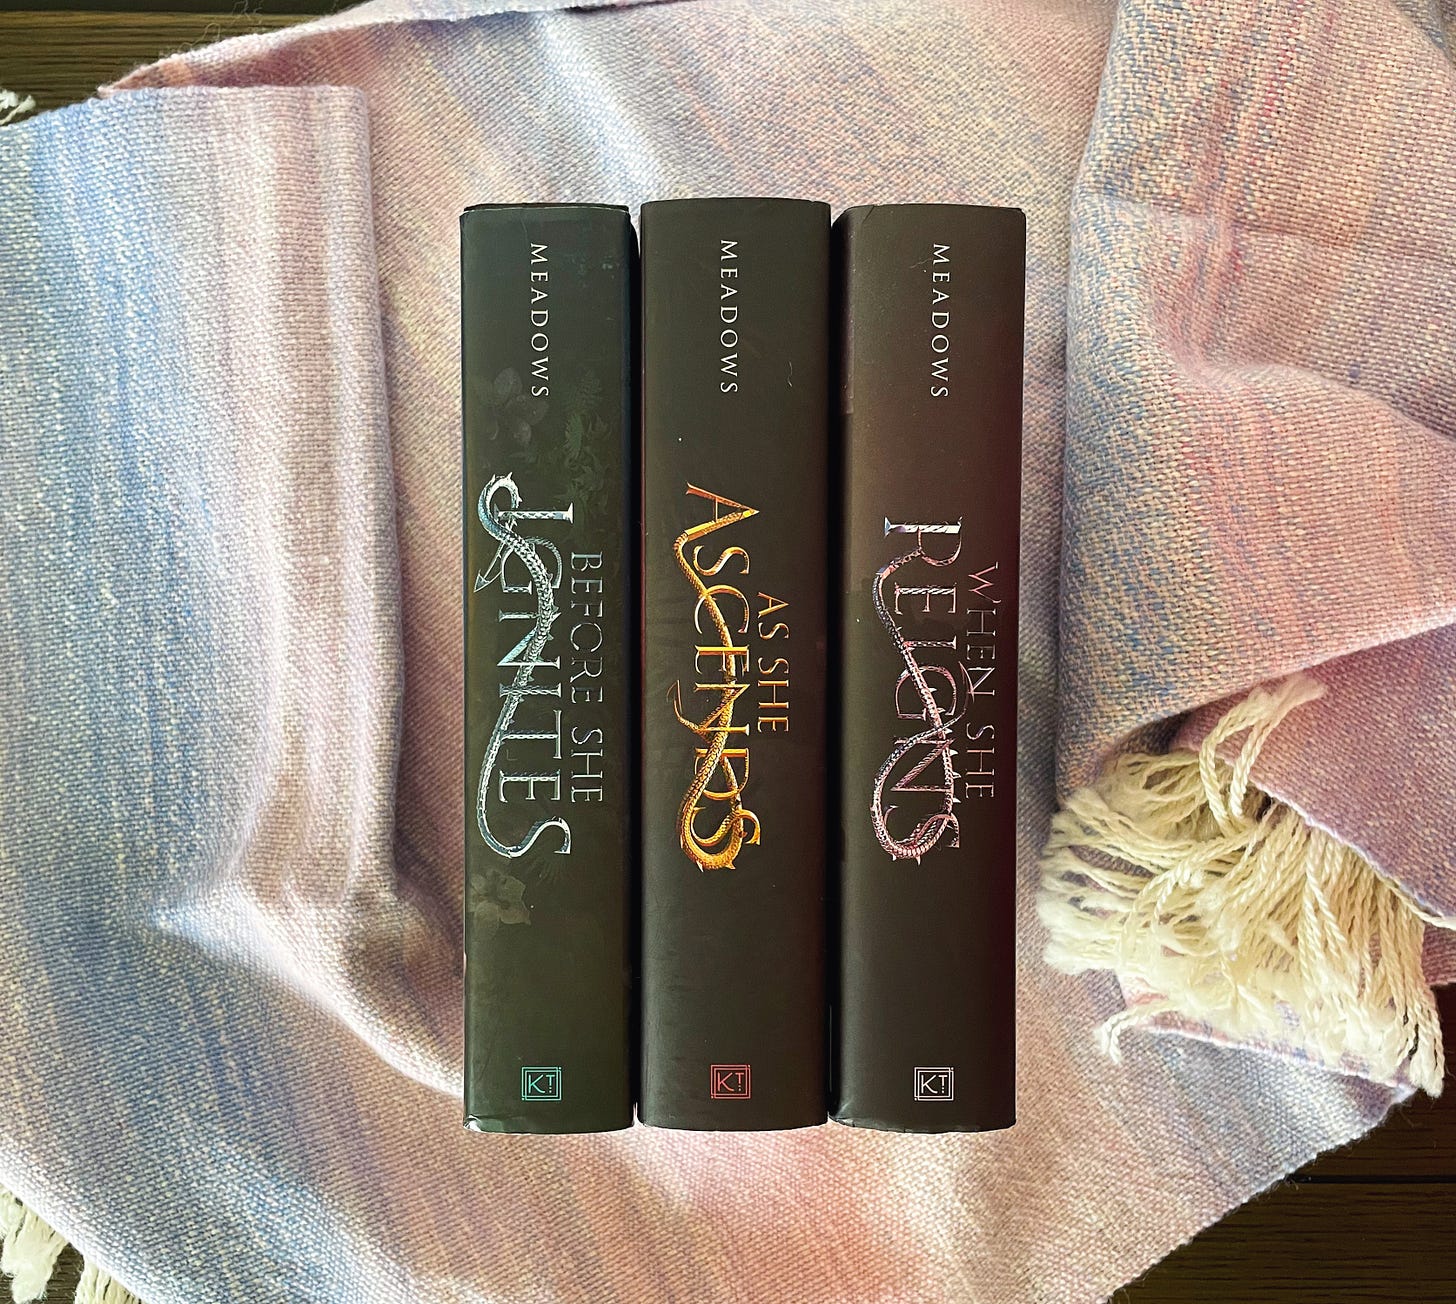 Three books, the Fallen Isles trilogy, on a pastel woven cloth